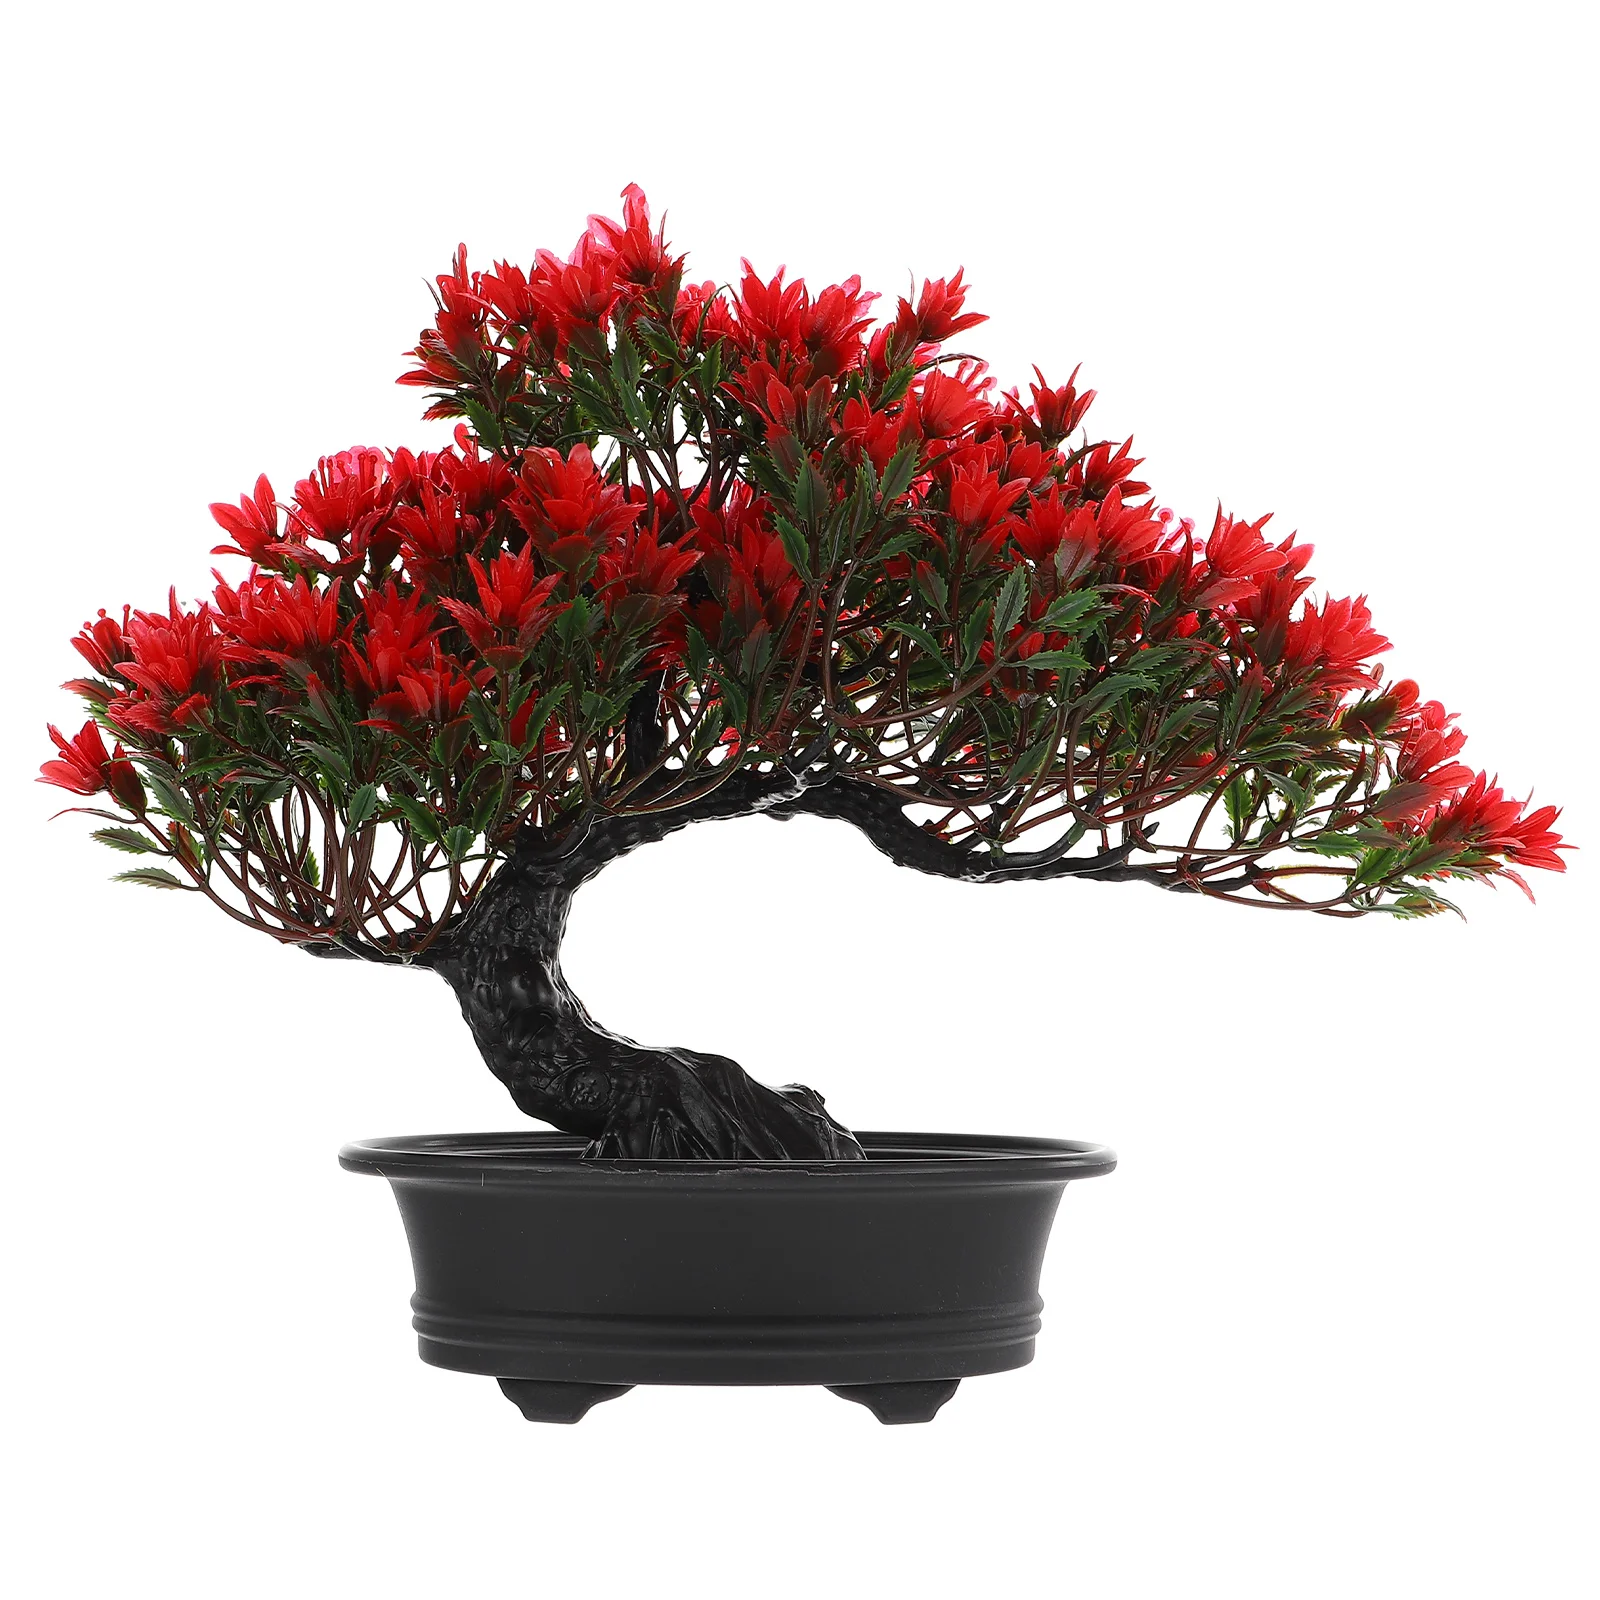 

Bonsai Tree Artificial Fake Pine Decor Simulation Potted Office Welcoming Trees Garden Faux Desk Bathroom Decorations Realistic